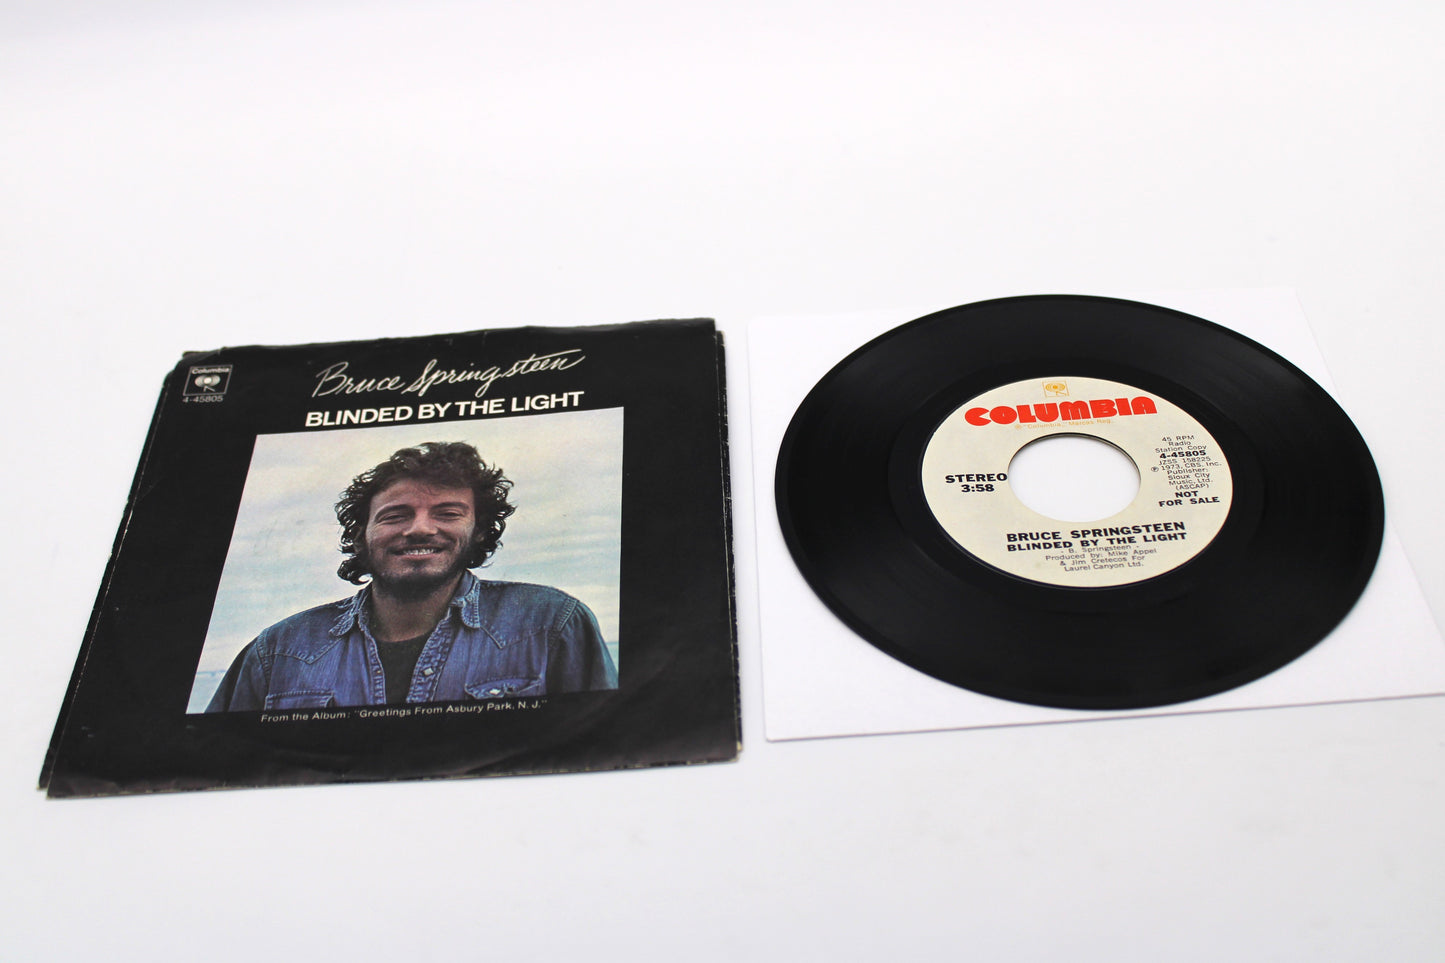 Bruce Springsteen - Blinded By The Light - Columbia records 45 / 7" Vinyl (NM) with Picture Sleeve (VG+)